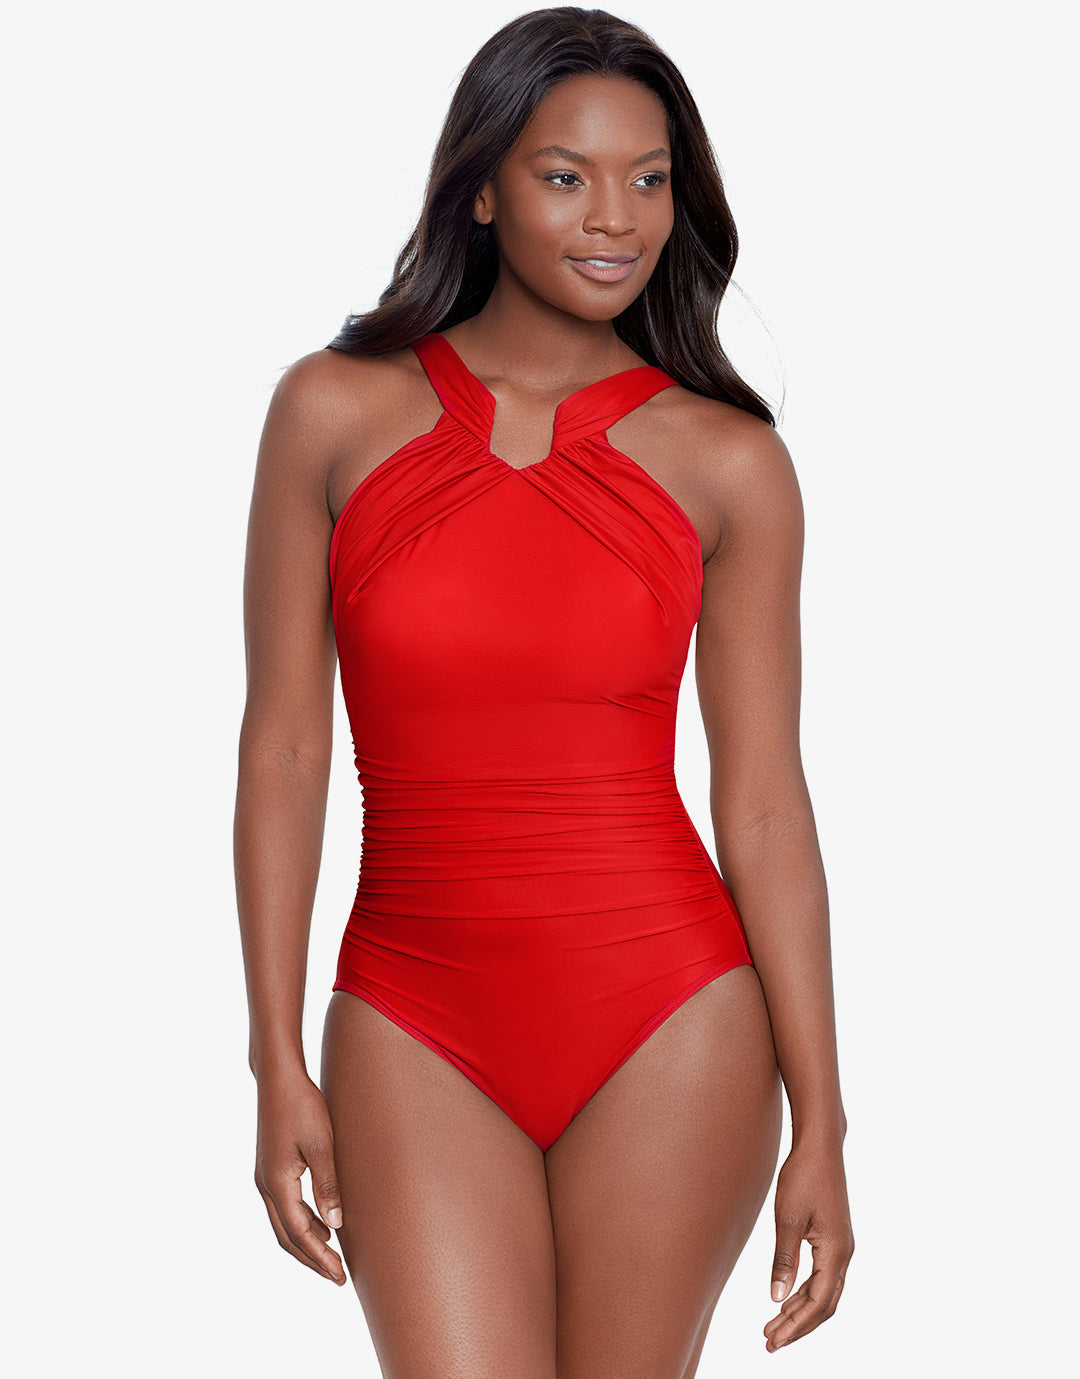 Rock Solid Aphrodite Swimsuit - Cayenne - Simply Beach UK